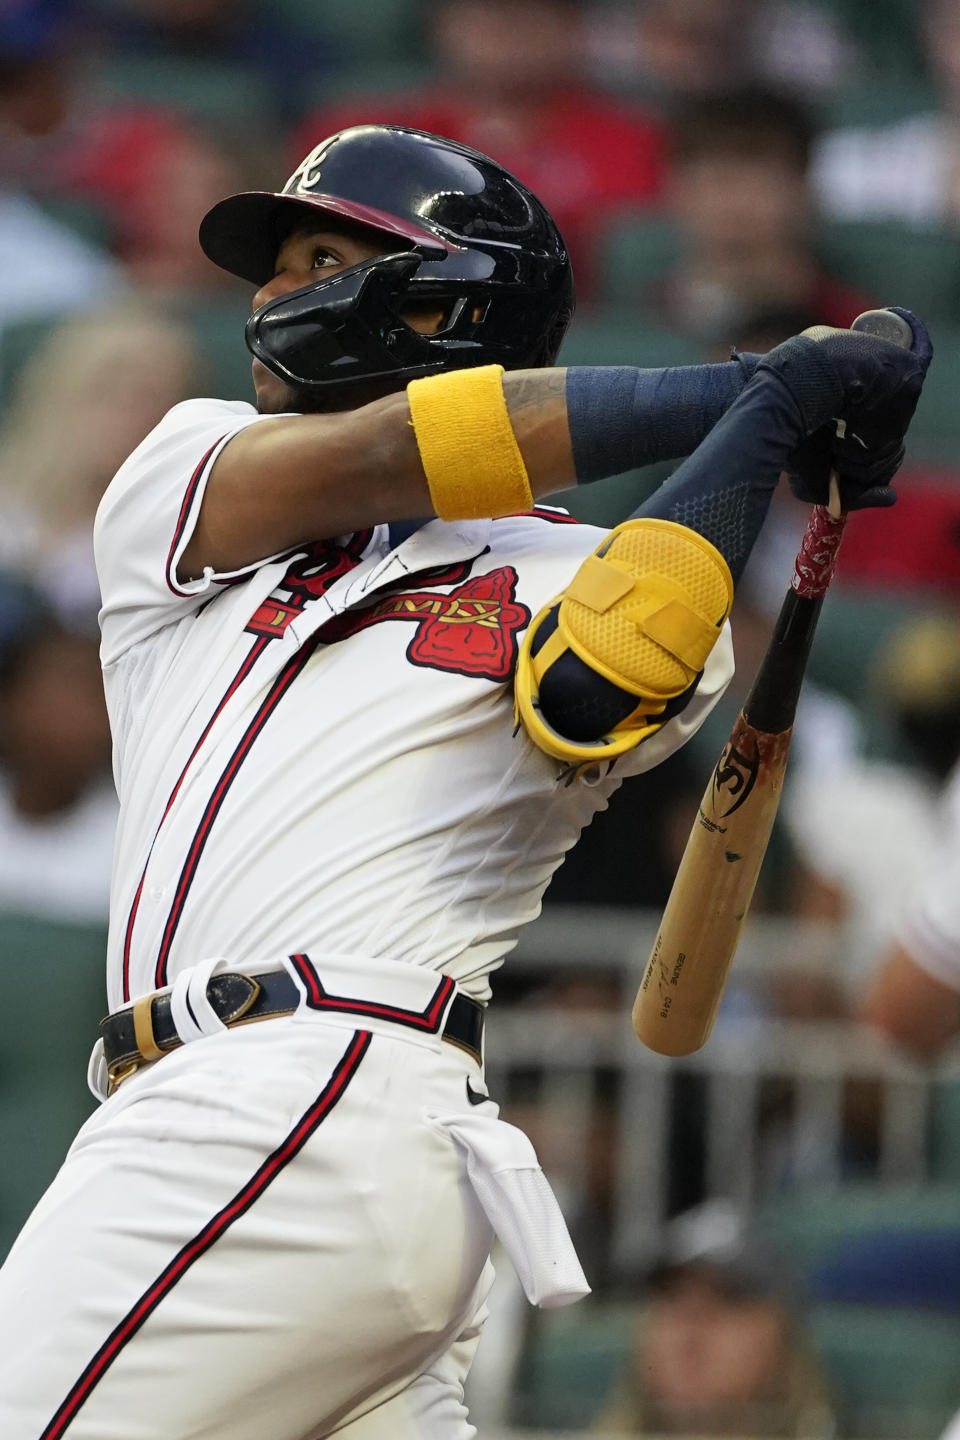 Atlanta Braves' Ronald Acuna Jr. watches his solo home run in the first inning of the team's baseball game against the Oakland Athletics on Tuesday, June 7, 2022, in Atlanta. (AP Photo/John Bazemore)